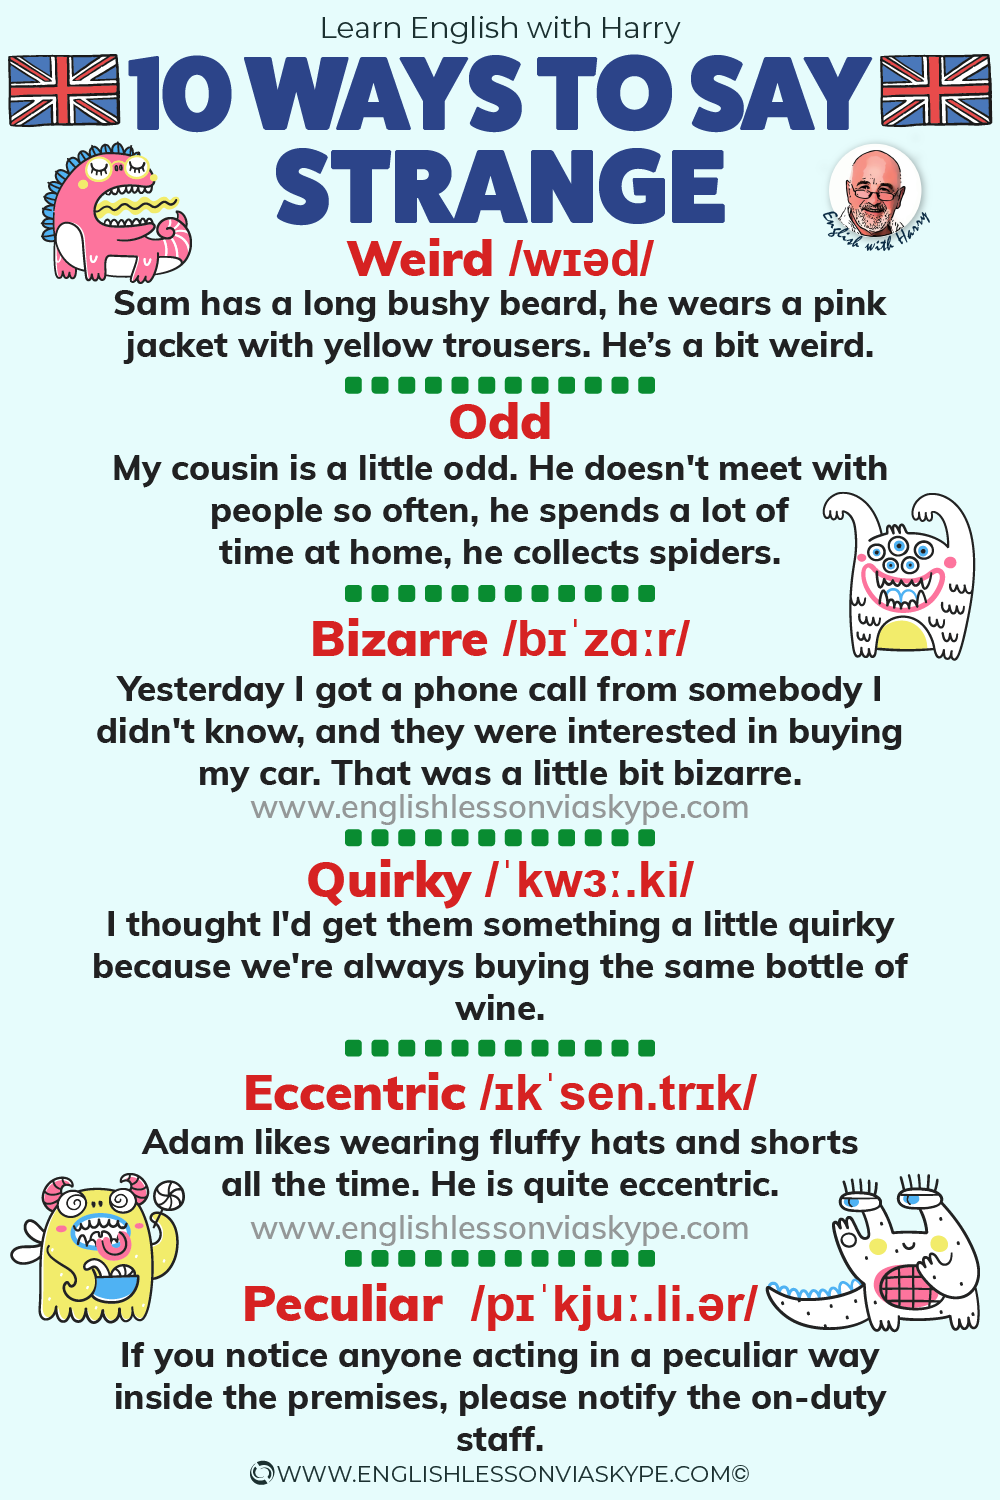 32 Ways to Say 'Crazy' in English